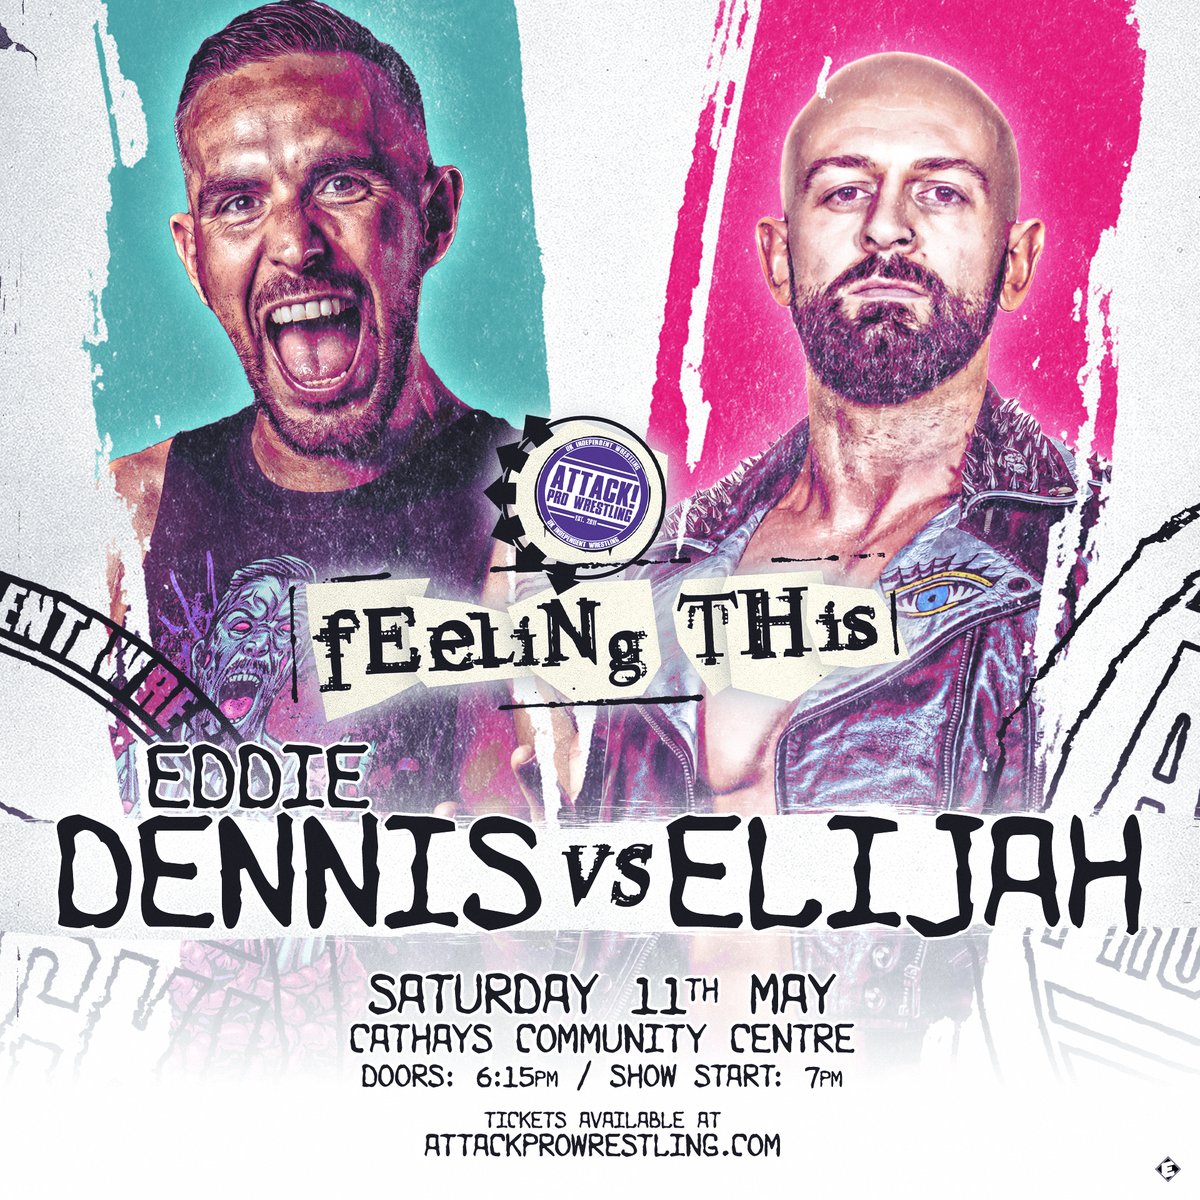 ELIJAH VS EDDIE DENNIS Former team mates go one on one this weekend, and Dennis has this to say about it ⬇️ WATCH HERE - youtube.com/watch?v=Cgkkt9… 🎟️ringsideworld.co.uk/event6822/atta…